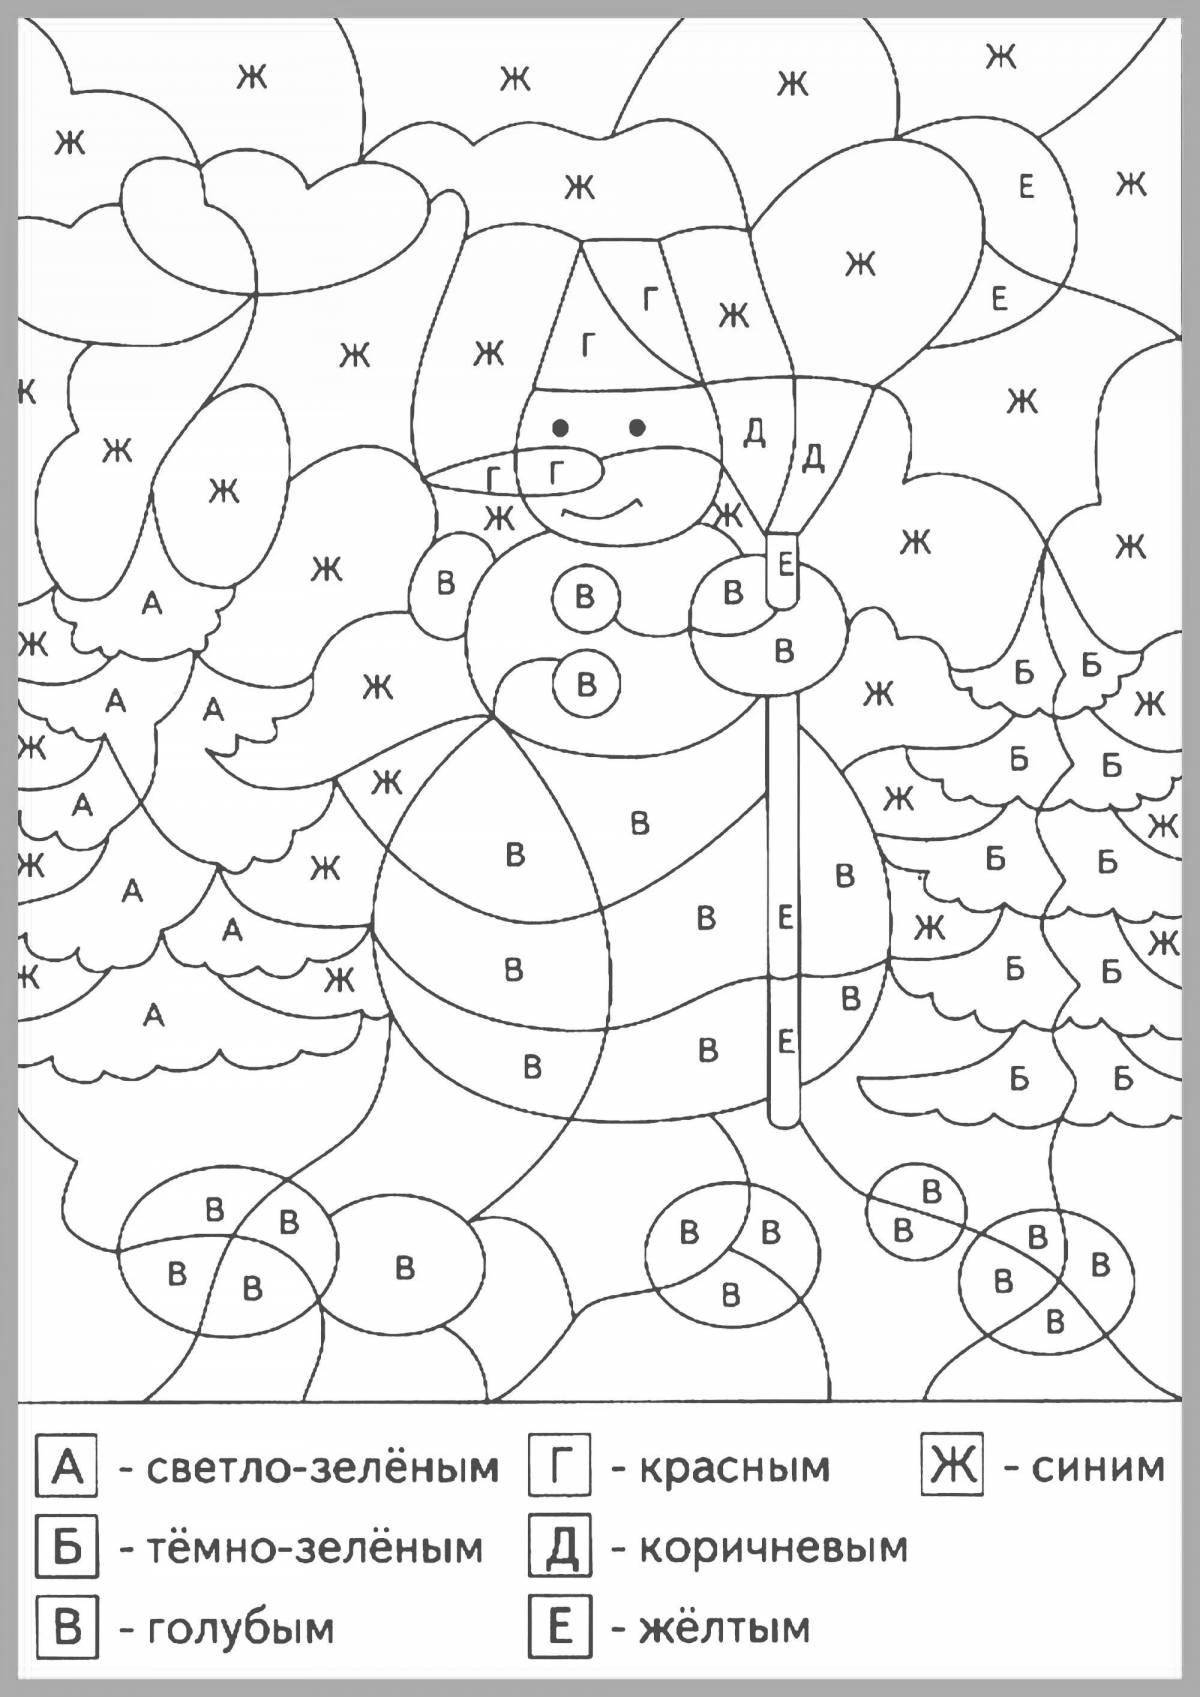 Fun coloring Christmas tree by numbers